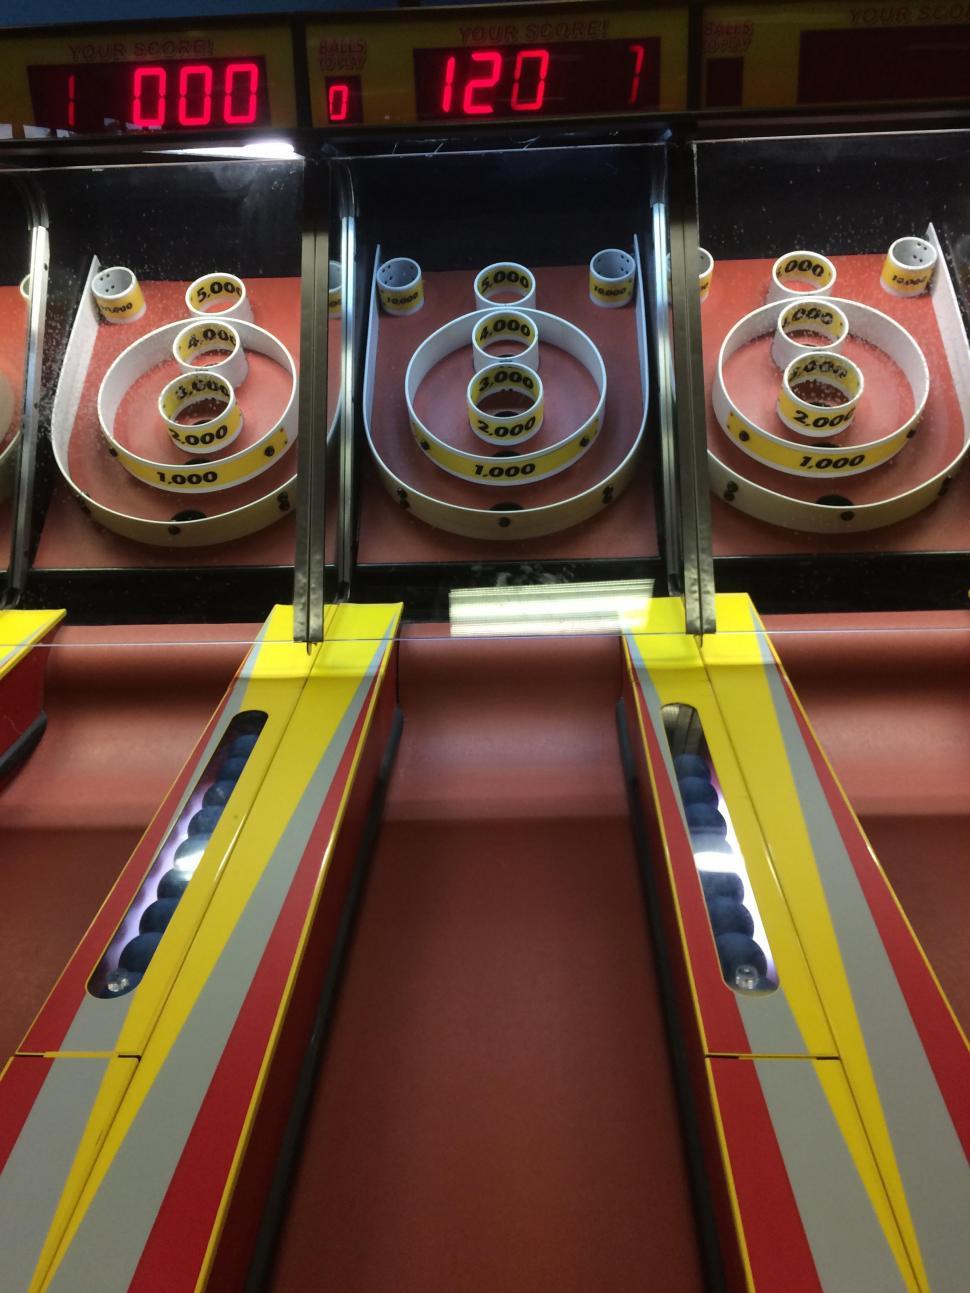 Free Image of Row of Red and Yellow Machines With Numbers 